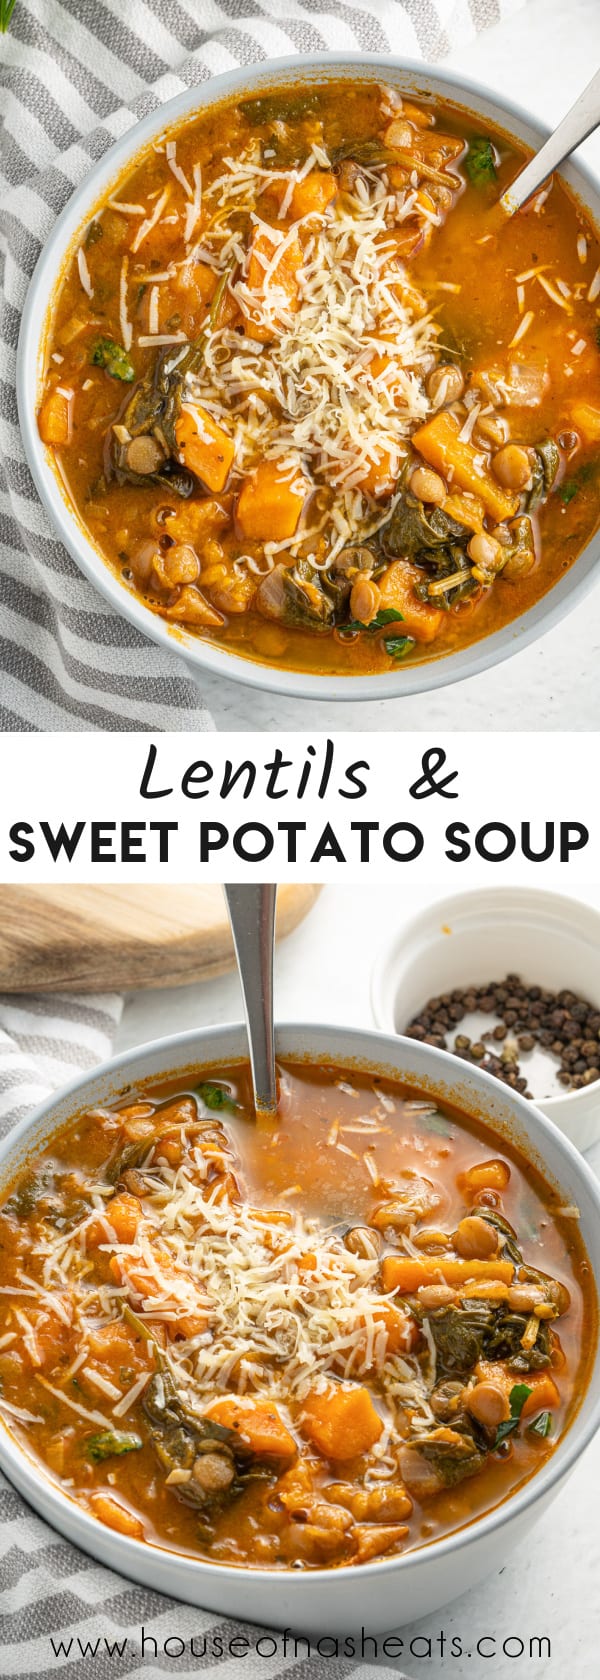 A collage of images of lentils & potato soup with text overlay.